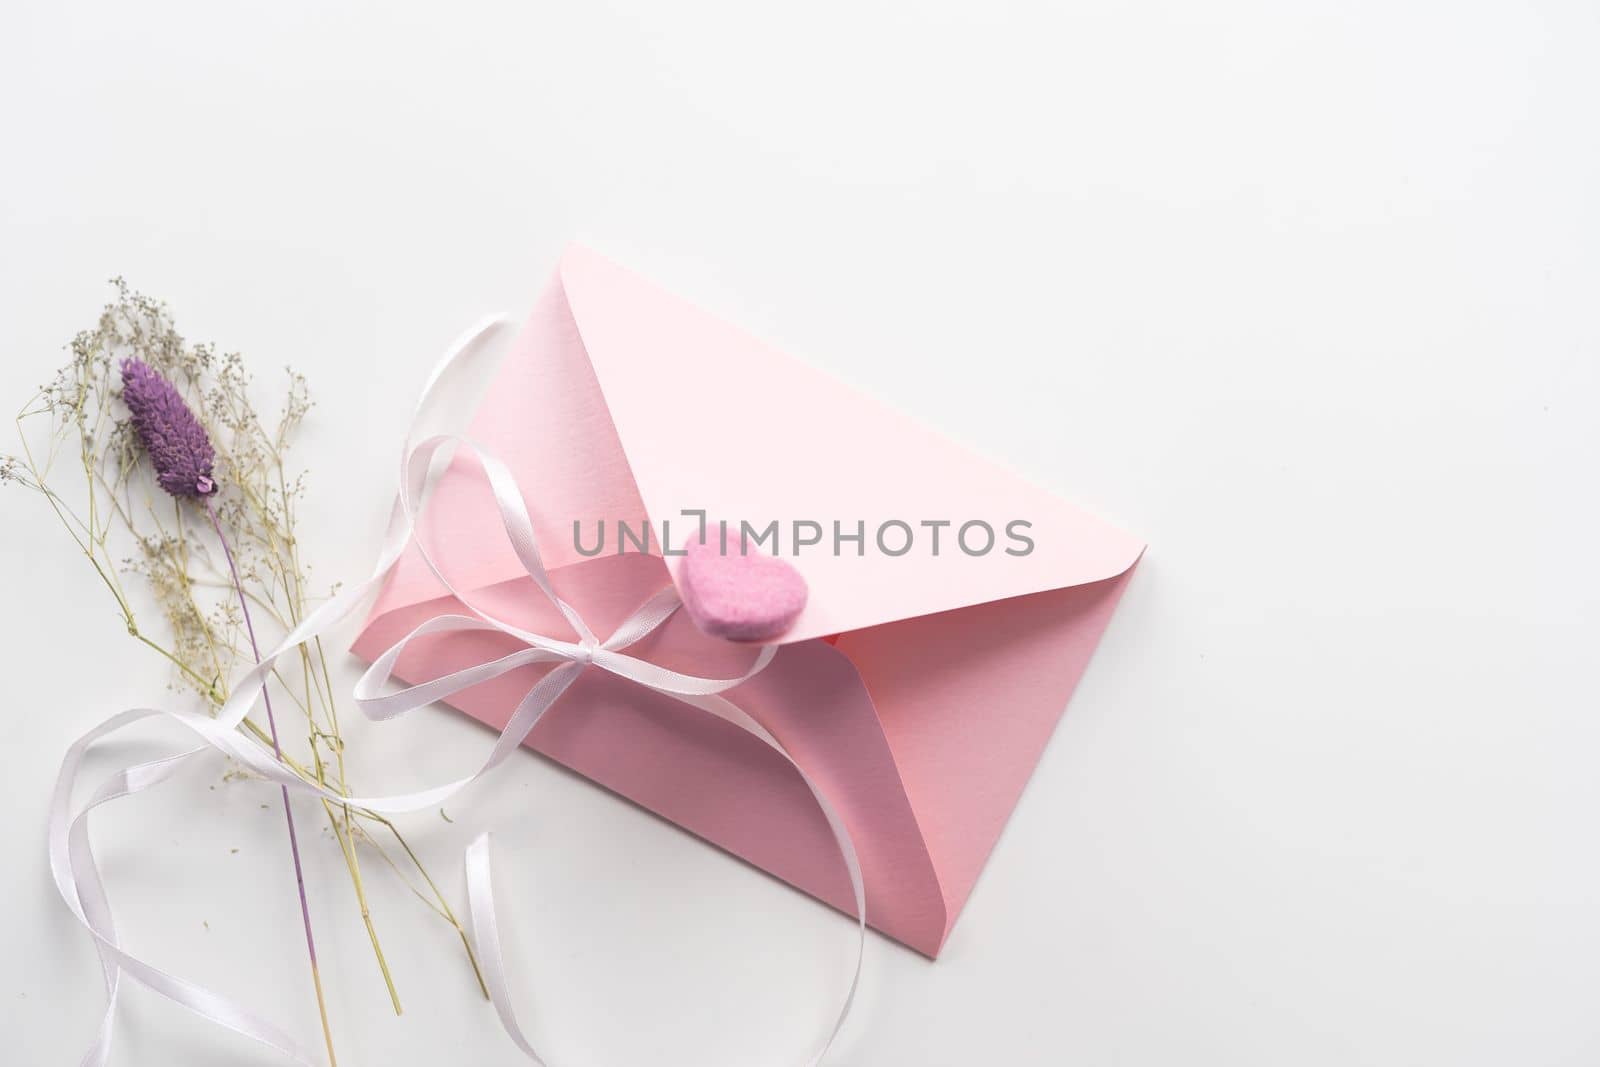 Minimal composition with a pink envelope, white blank card and a wax flower on a white background. Mockup with envelope and blank card. Flat lay. Top view